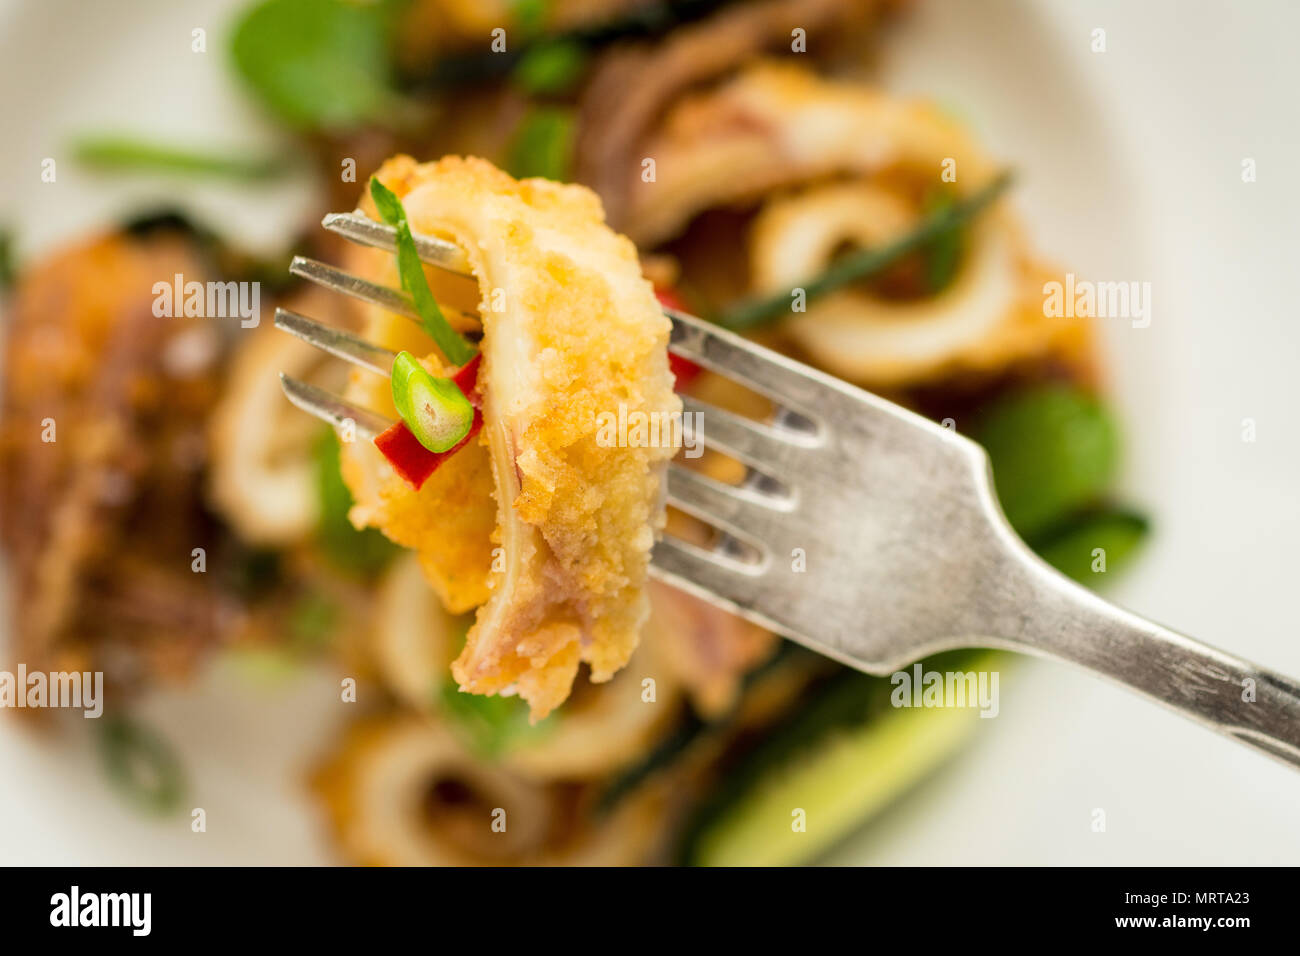 Fresh Fried Squids, Chili Pepper and Mint Leaves on White Plate Stock Photo